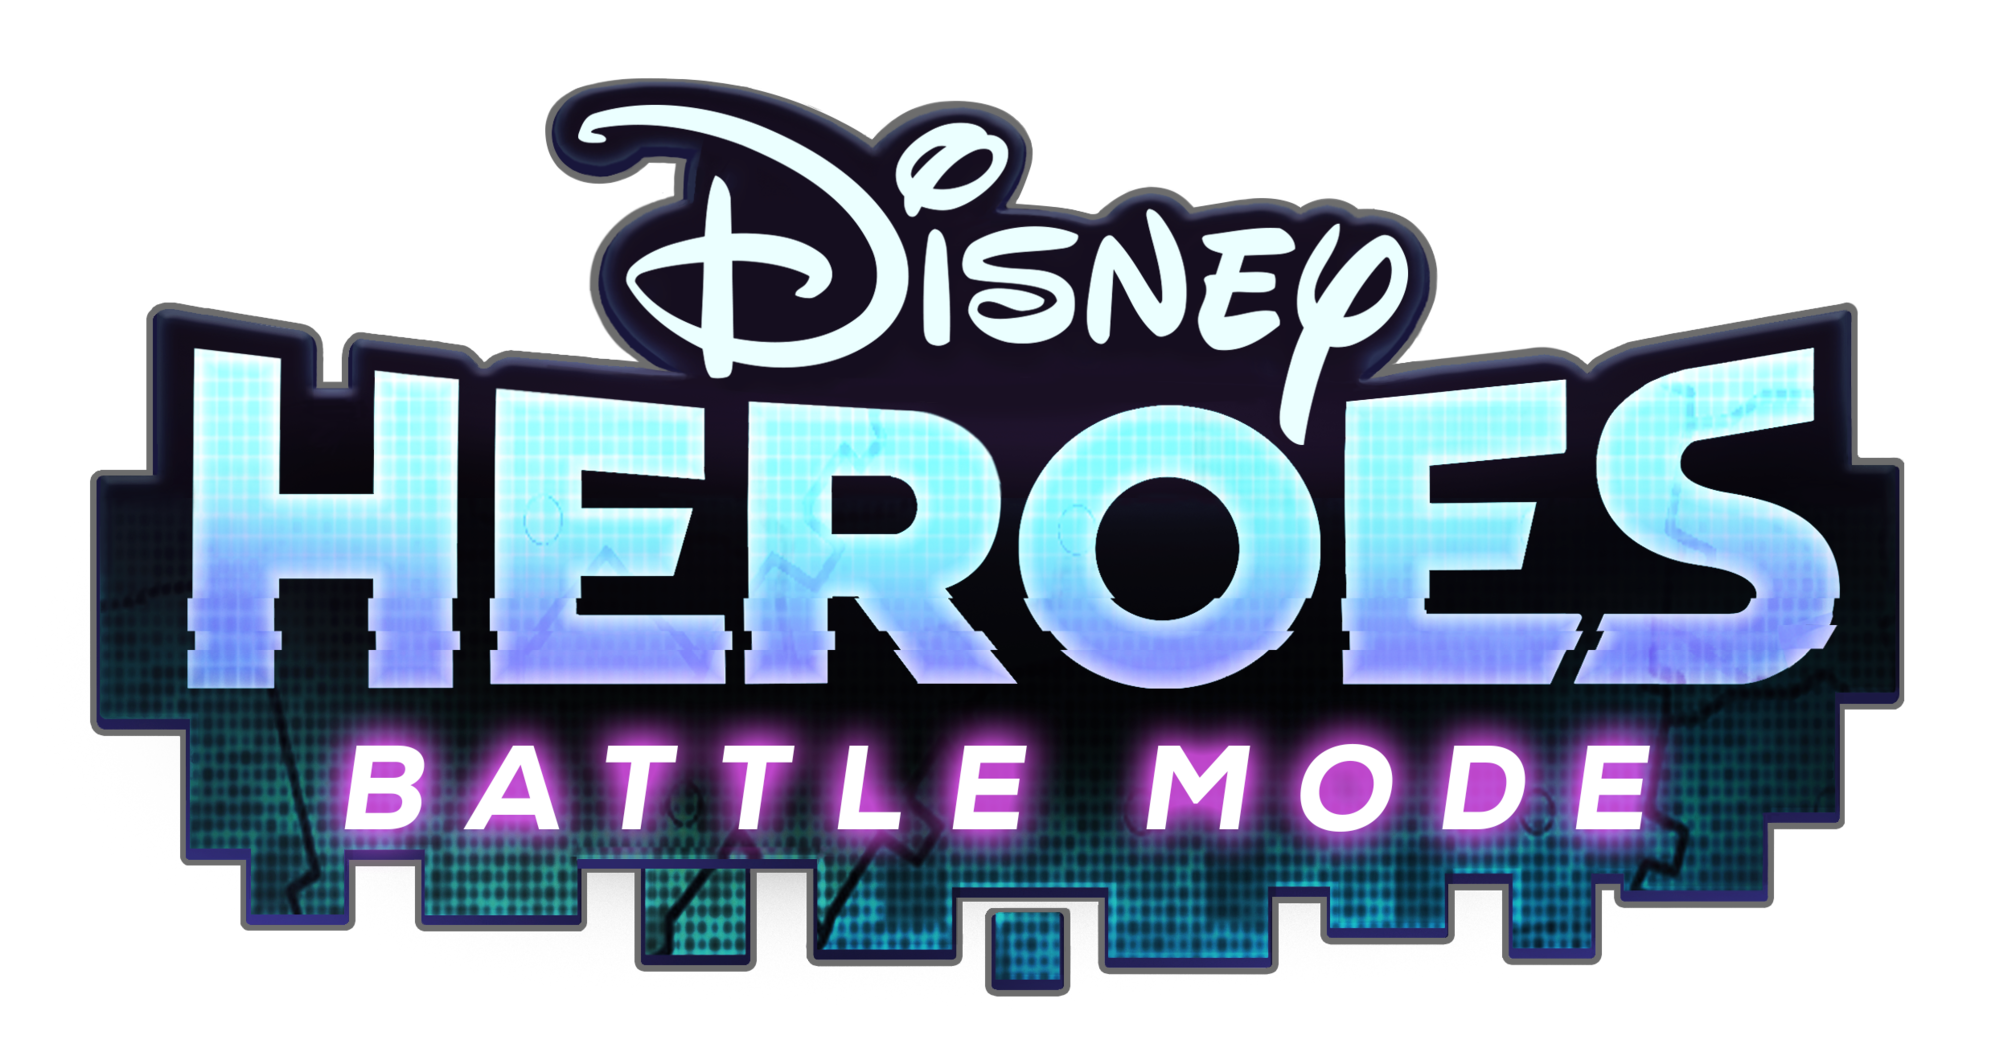 The Disney Wiki says Luz is coming to Disney Heroes Battle Mode